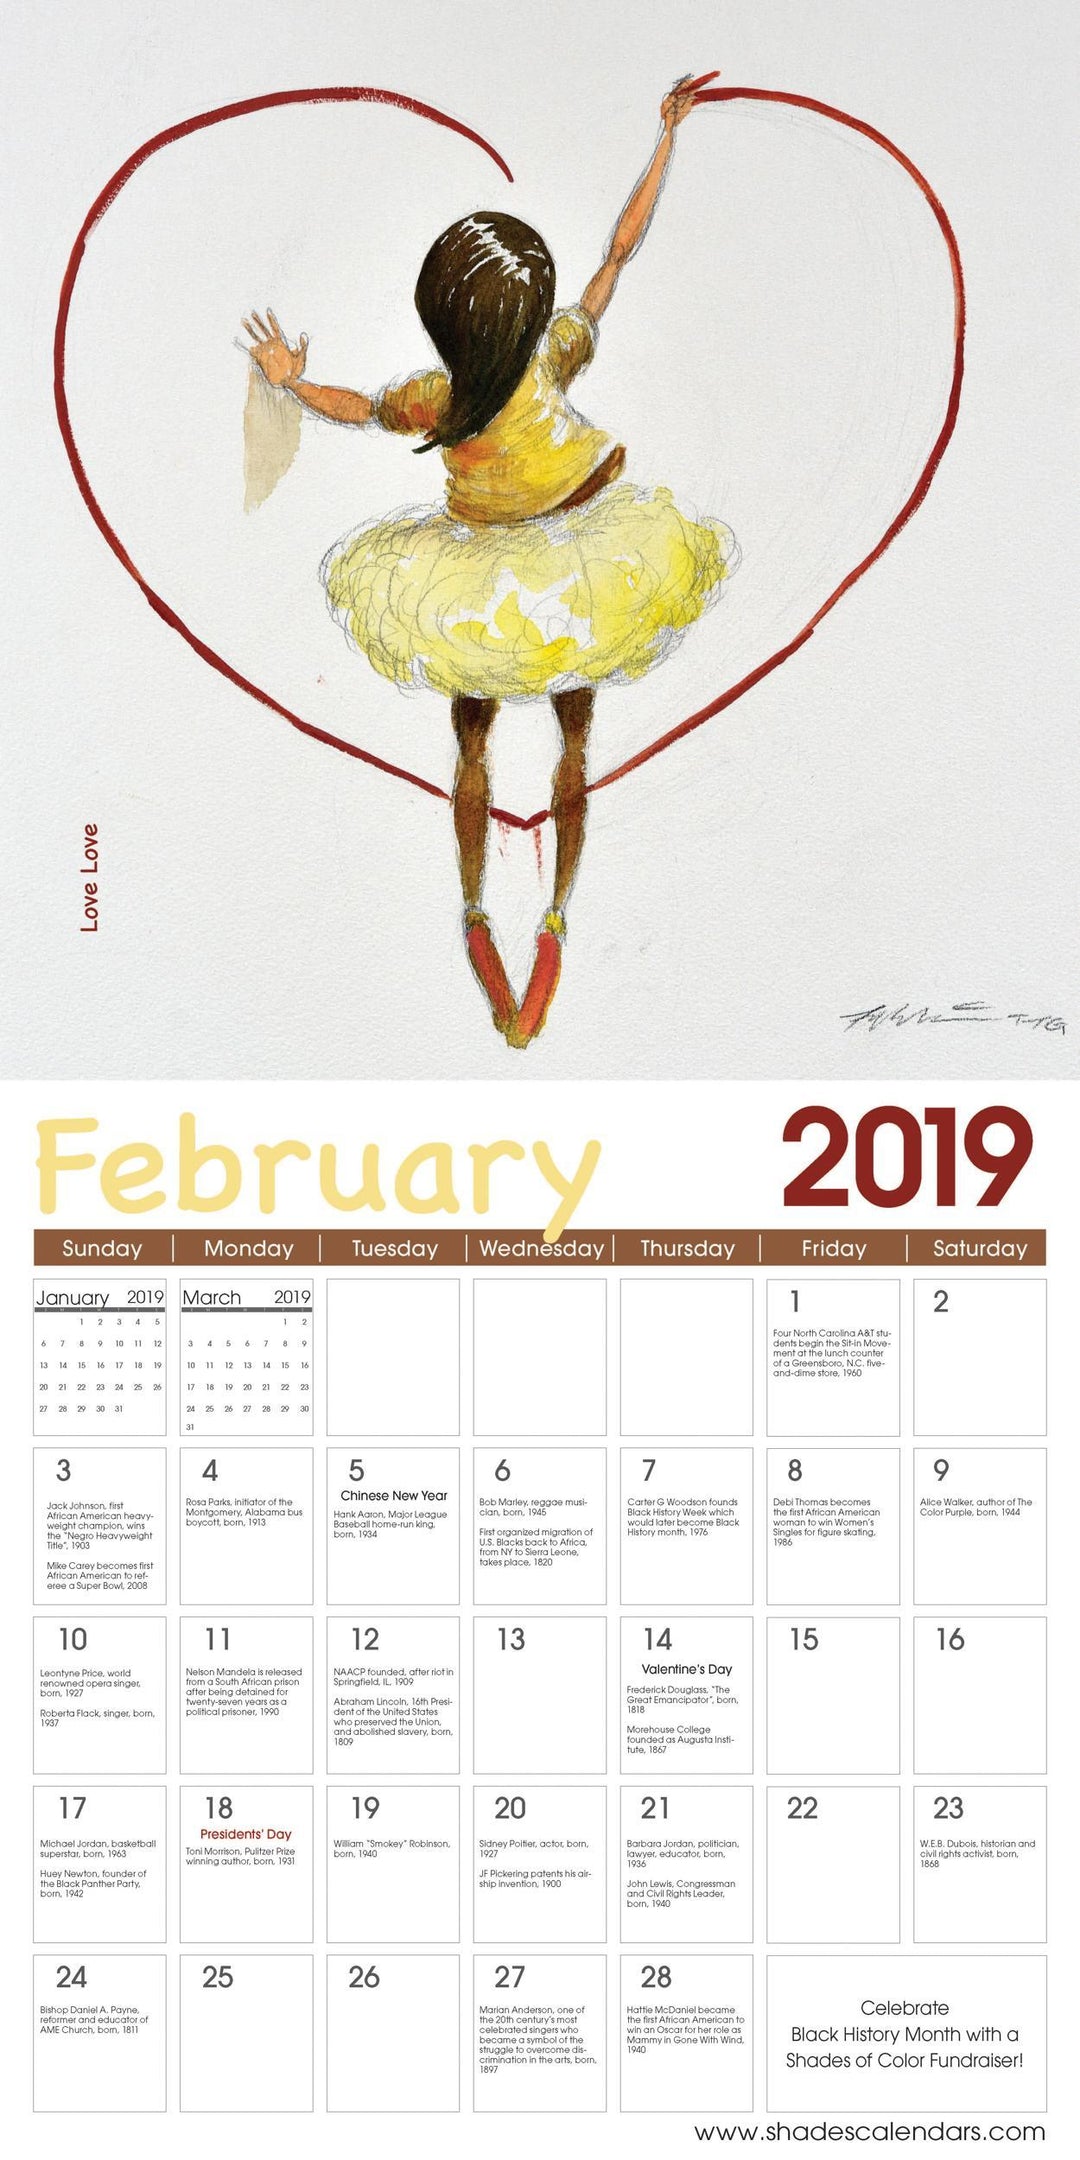 Shades of Color Kids: The Art of Frank Morrison (2019 African American Calendar) (Interior)